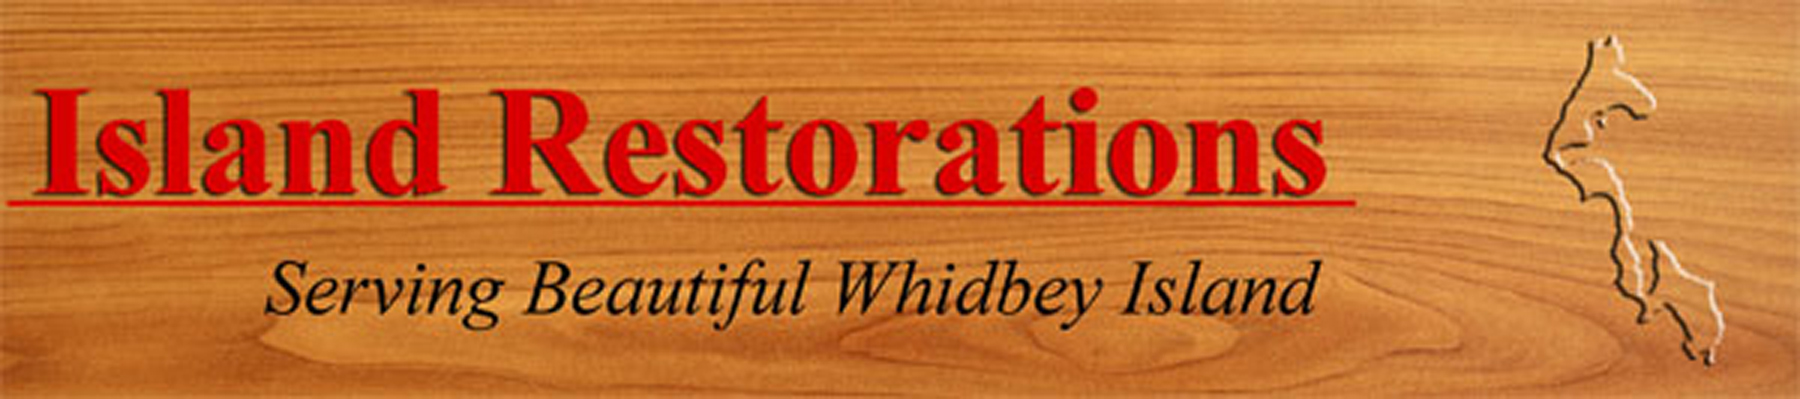 Island Restorations performs types of wood furniture repair and refinishing.